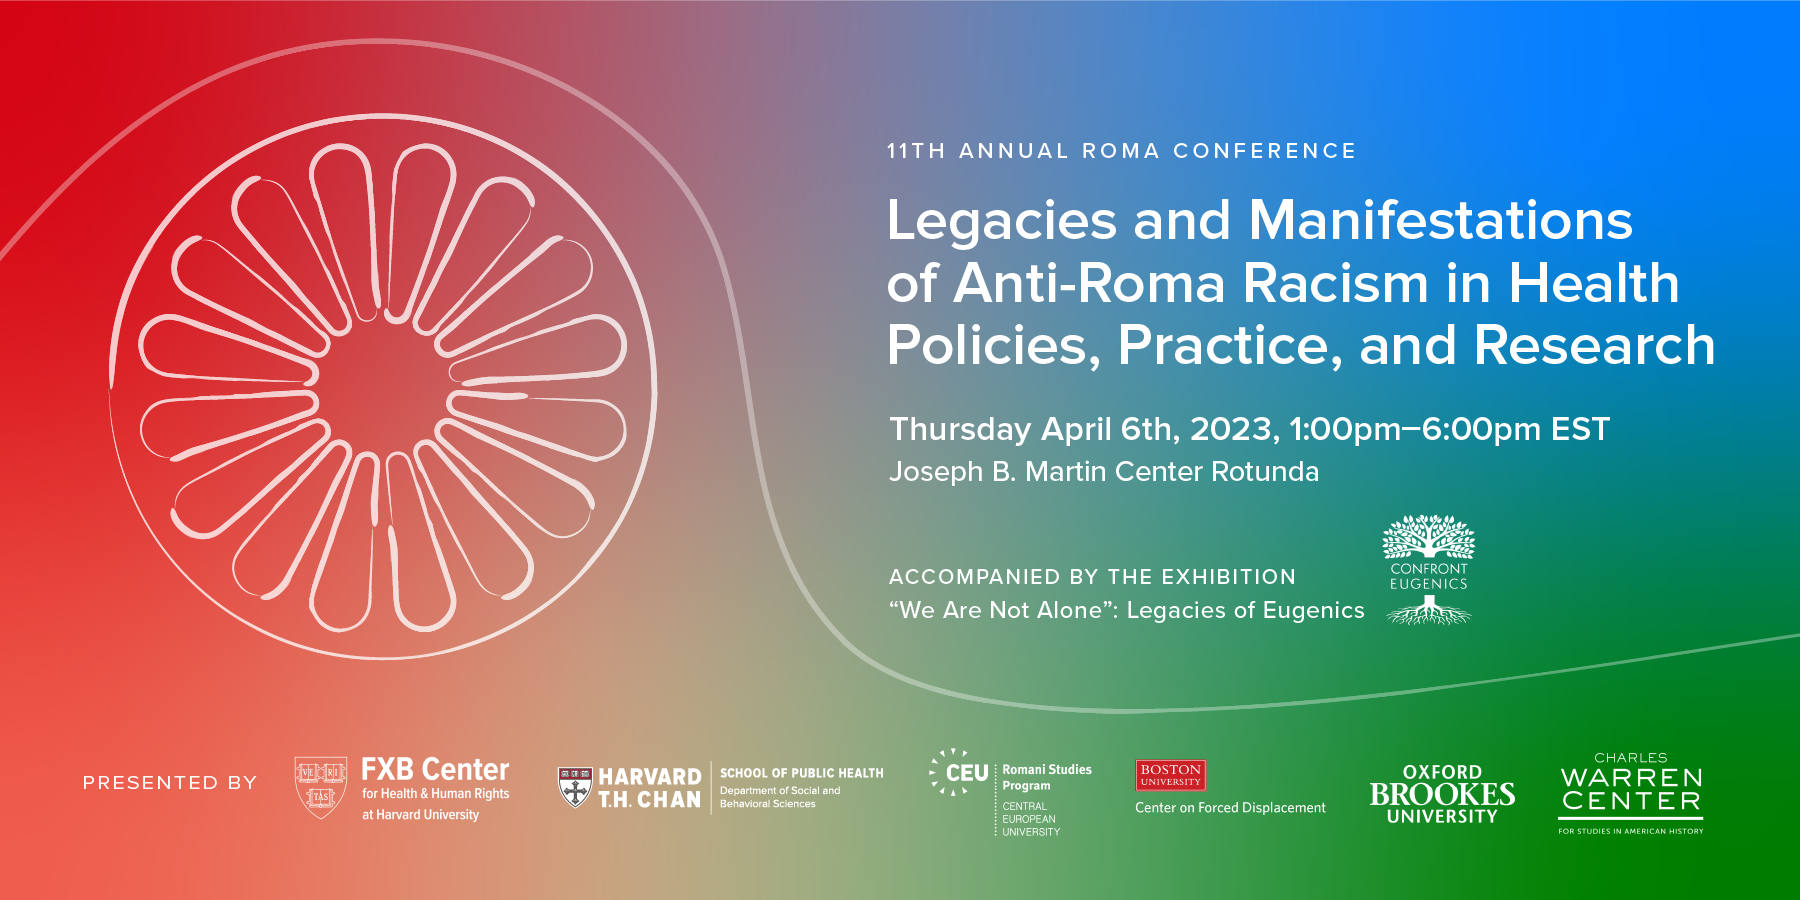 11th Annual Roma Conference: Legacies and Manifestations of Anti-Roma Racism in Health Policies, Practice, and Research